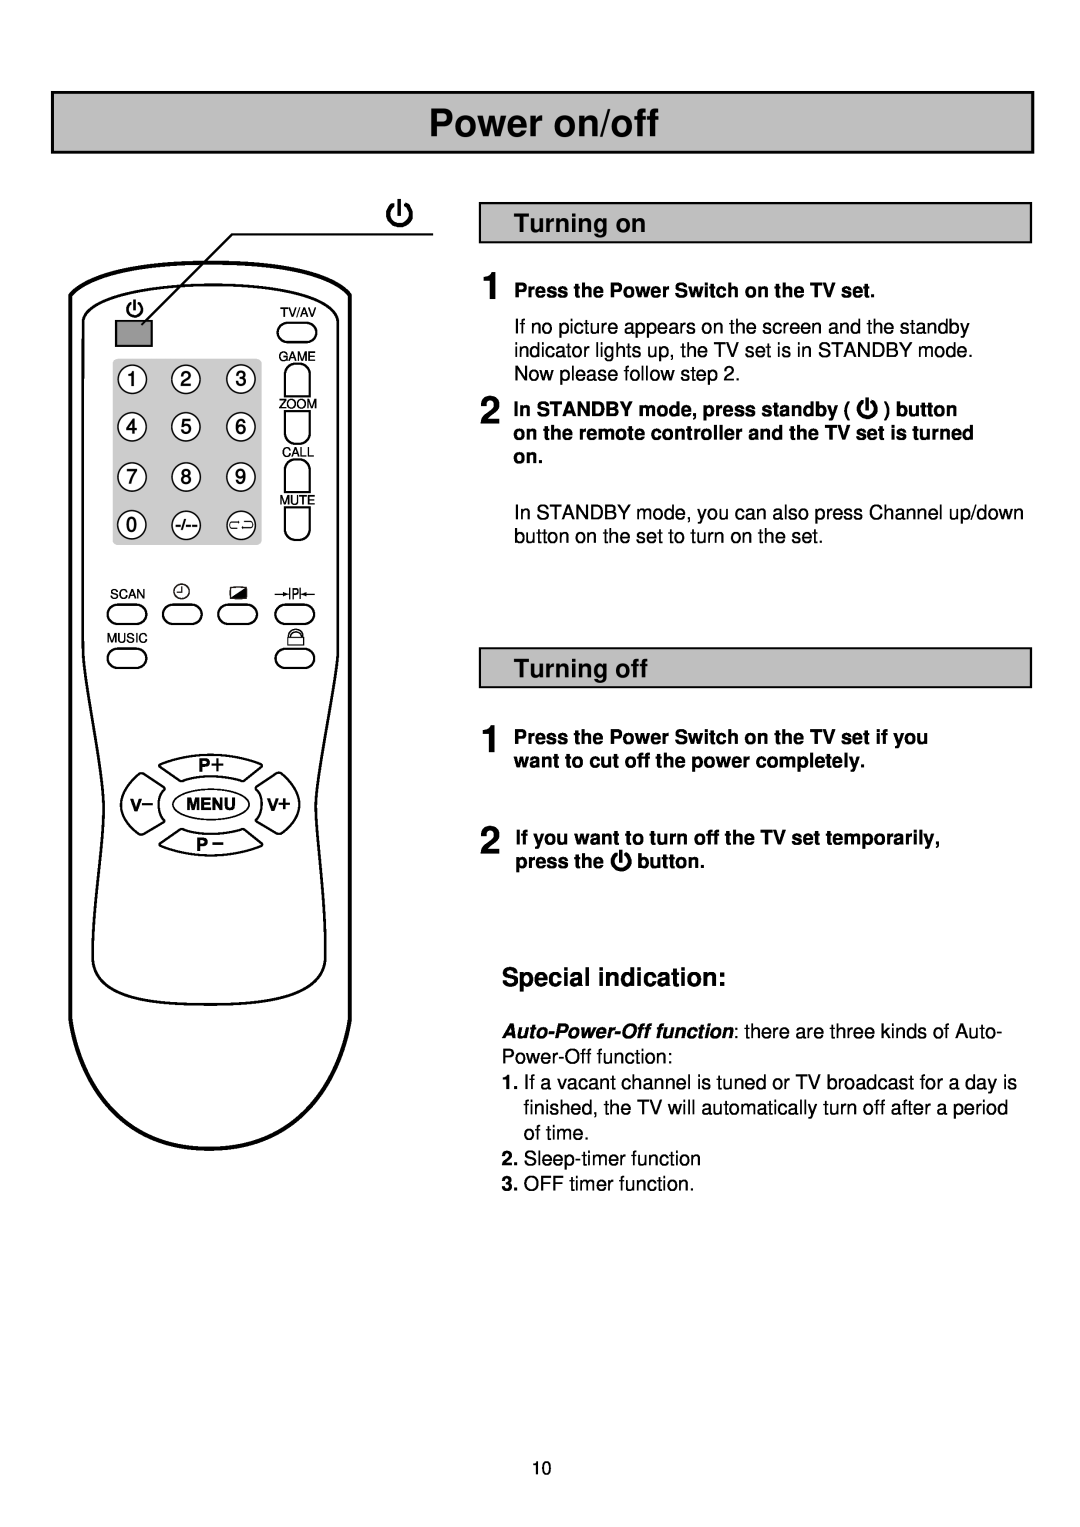 Palsonic 6835TK Power on/off, Turning on, Turning off, Special indication, Press the Power Switch on the TV set 